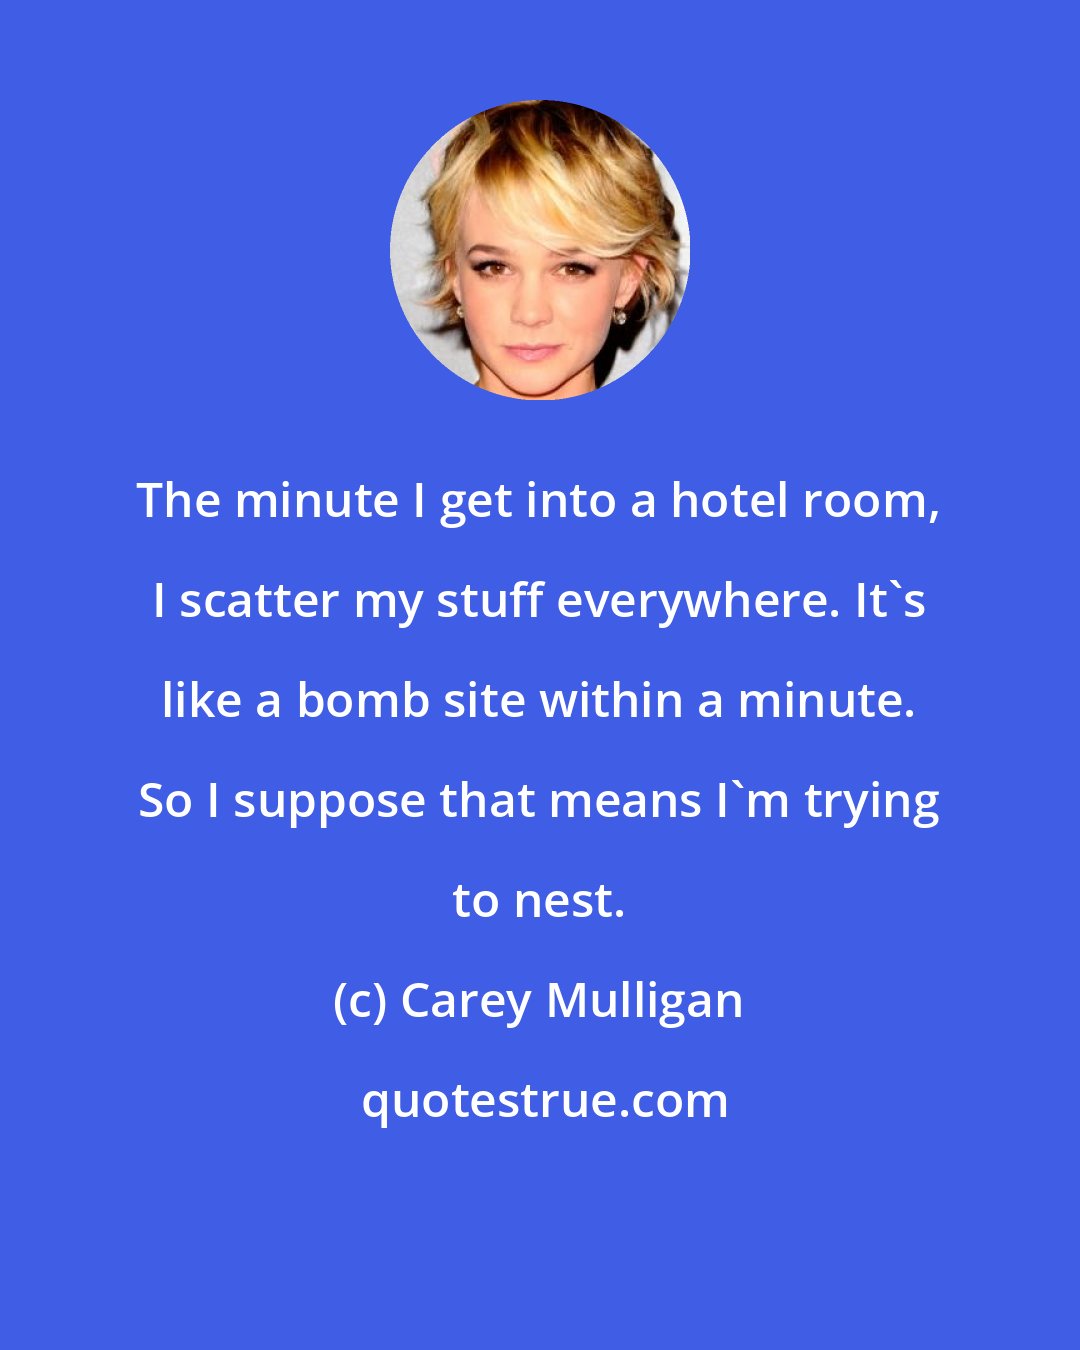 Carey Mulligan: The minute I get into a hotel room, I scatter my stuff everywhere. It's like a bomb site within a minute. So I suppose that means I'm trying to nest.